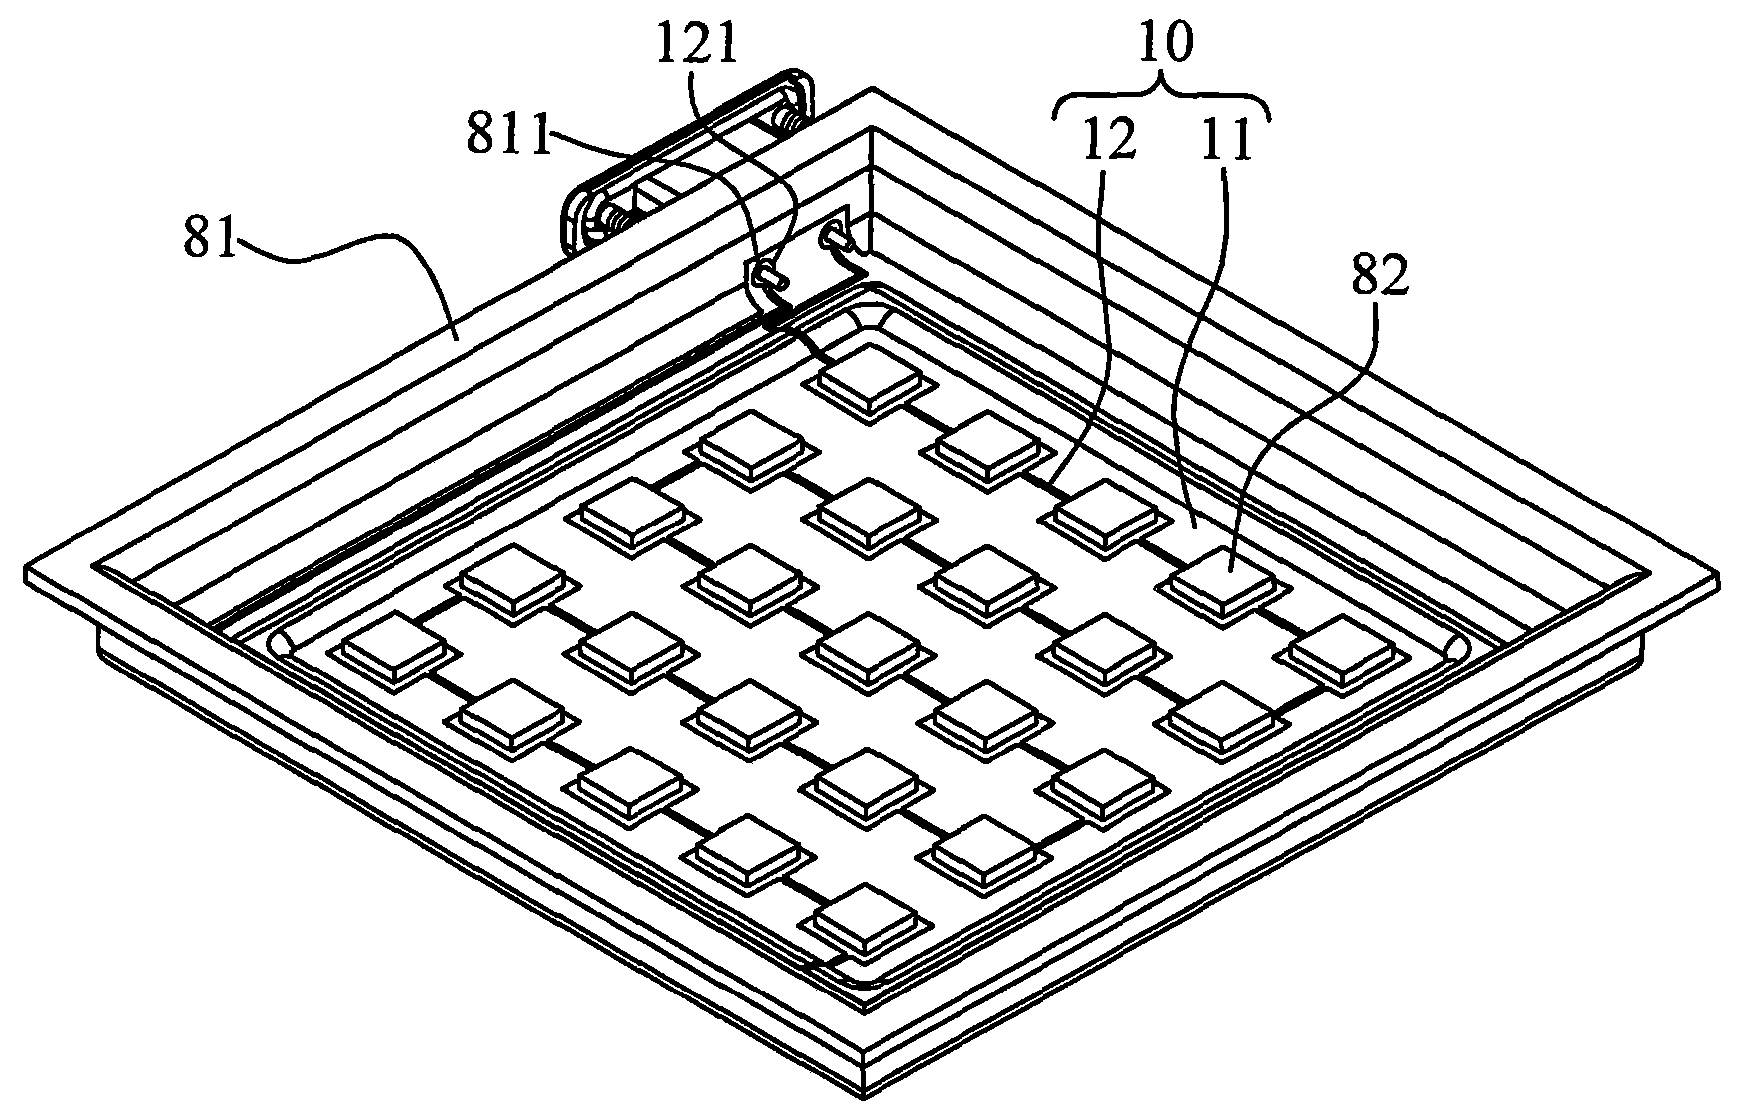 Conductive coating structure for lighting device